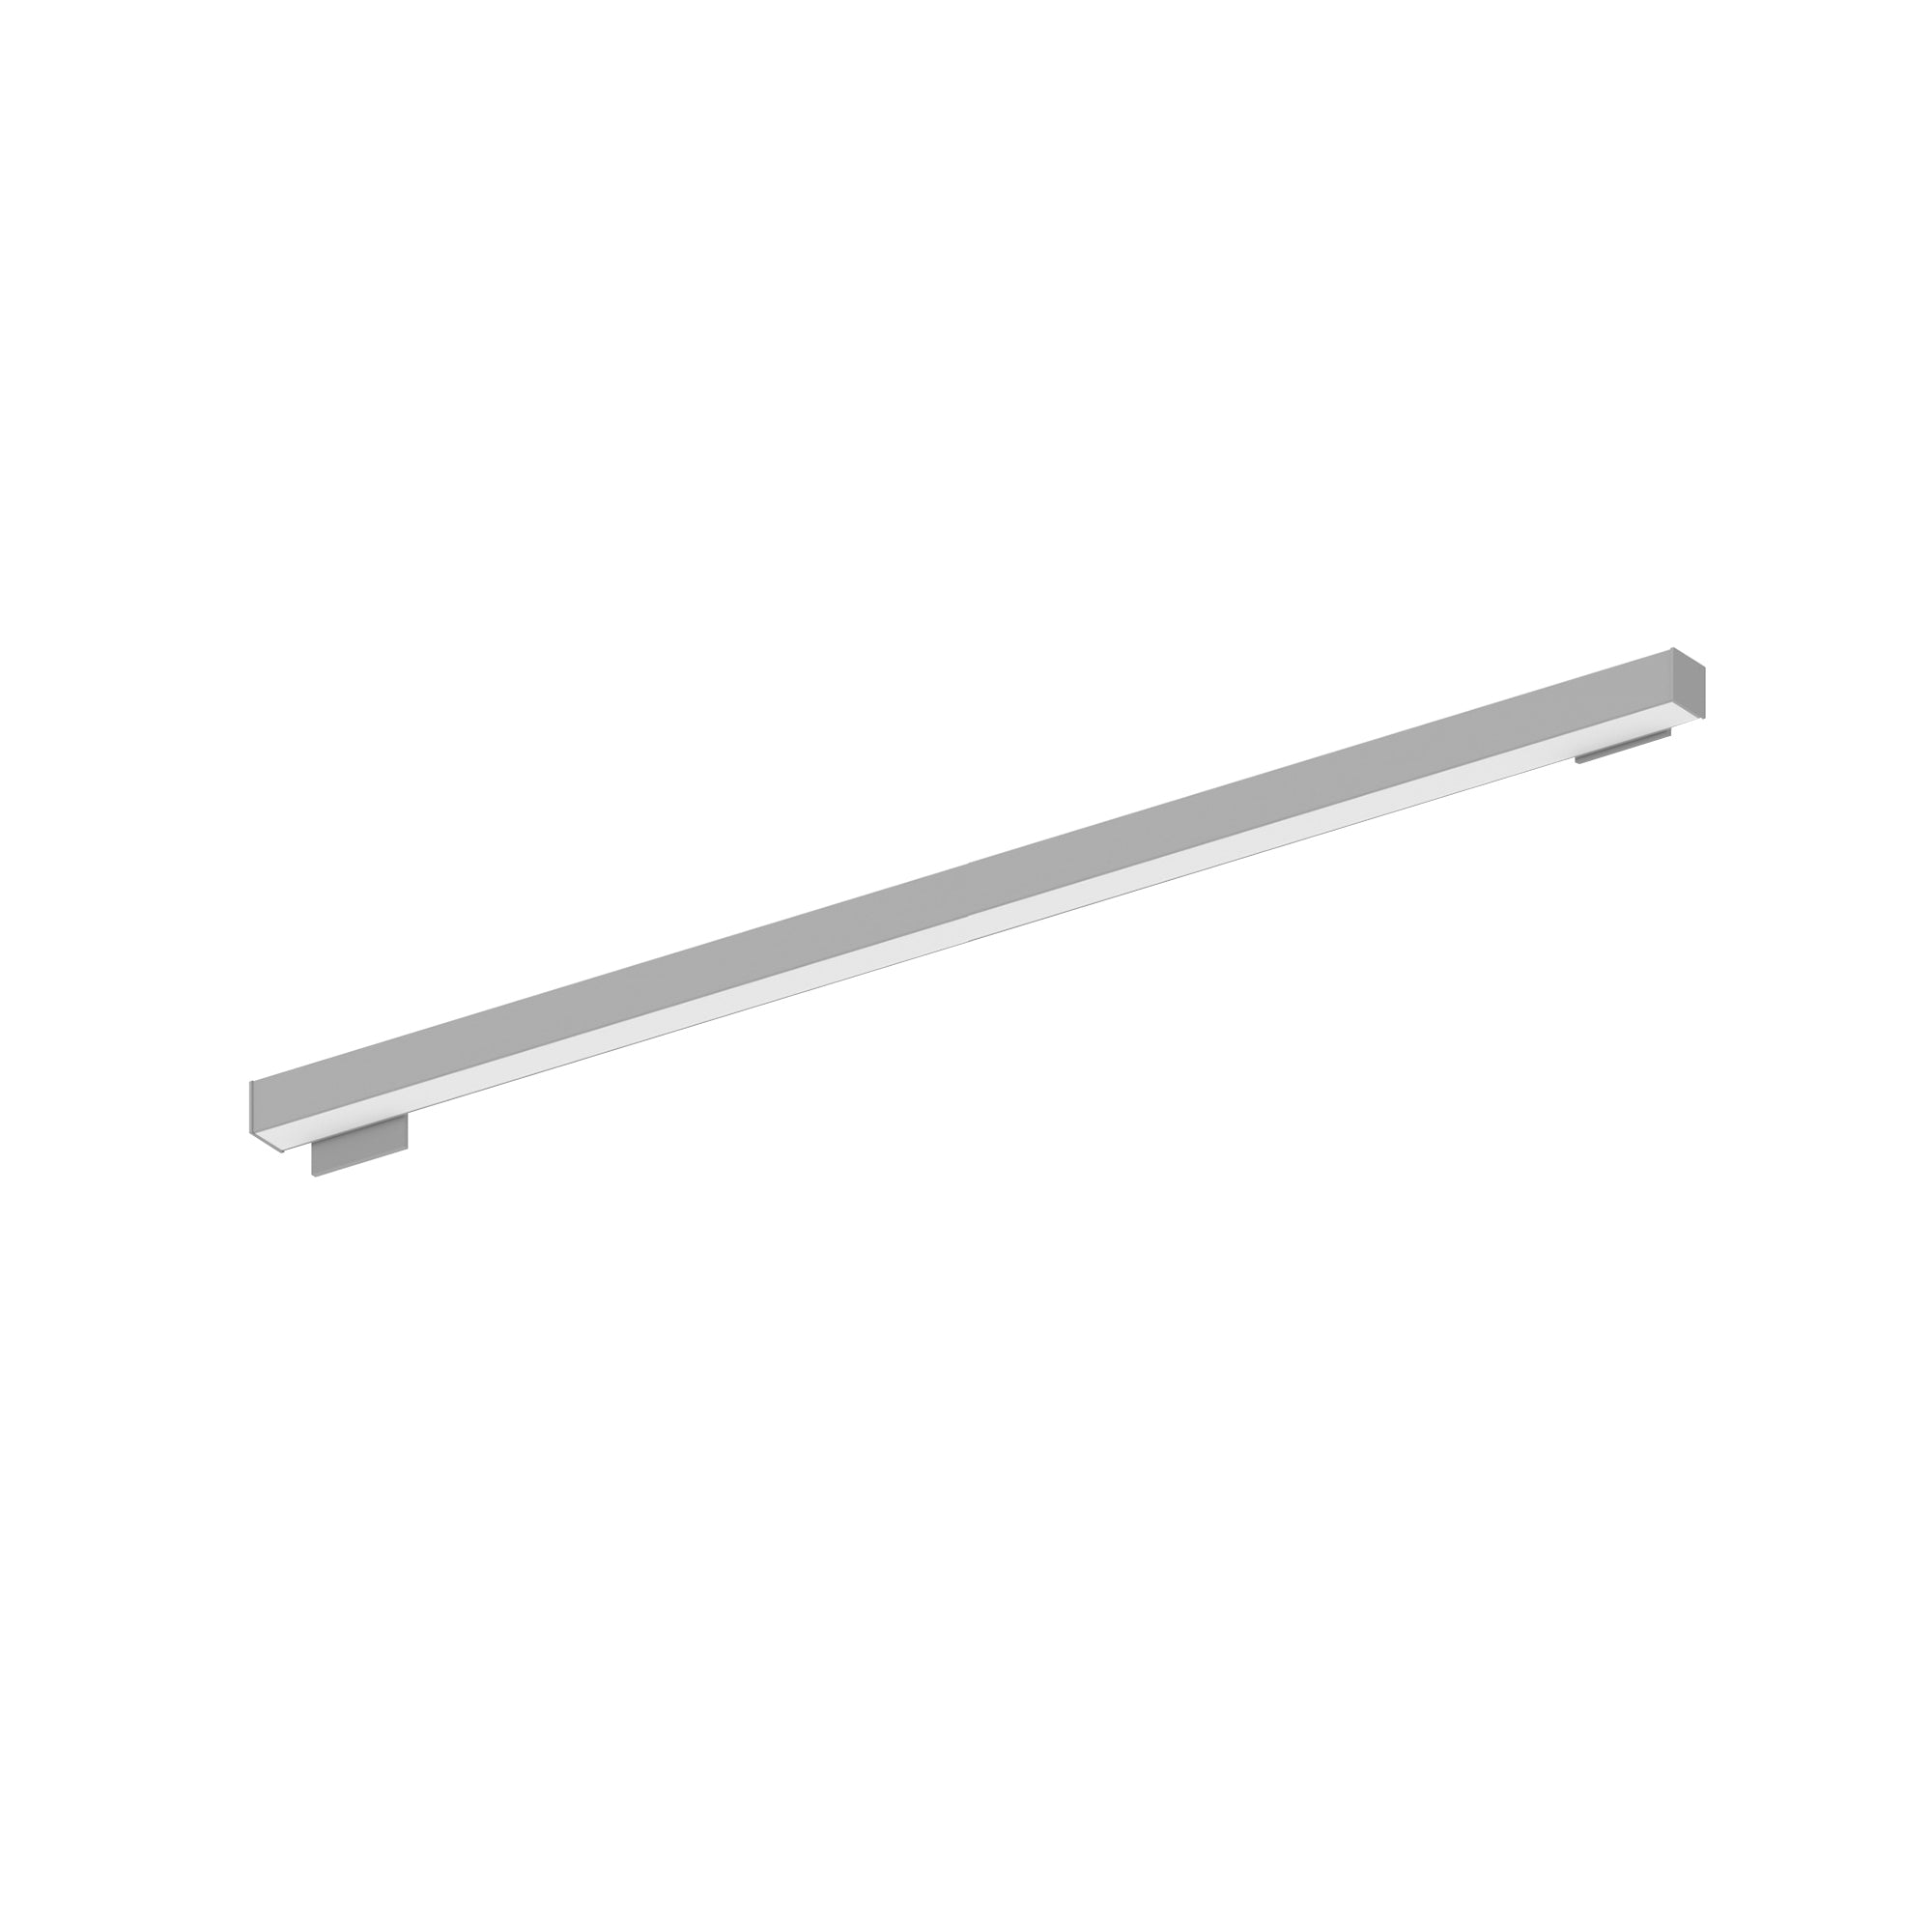 Nora Lighting NWLIN-81035A/L4P-R2 - Linear - 8' L-Line LED Wall Mount Linear, 8400lm / 3500K, 4 Inchx4 Inch Left Plate & 2 Inchx4 Inch Right Plate, Left Power Feed, Aluminum Finish